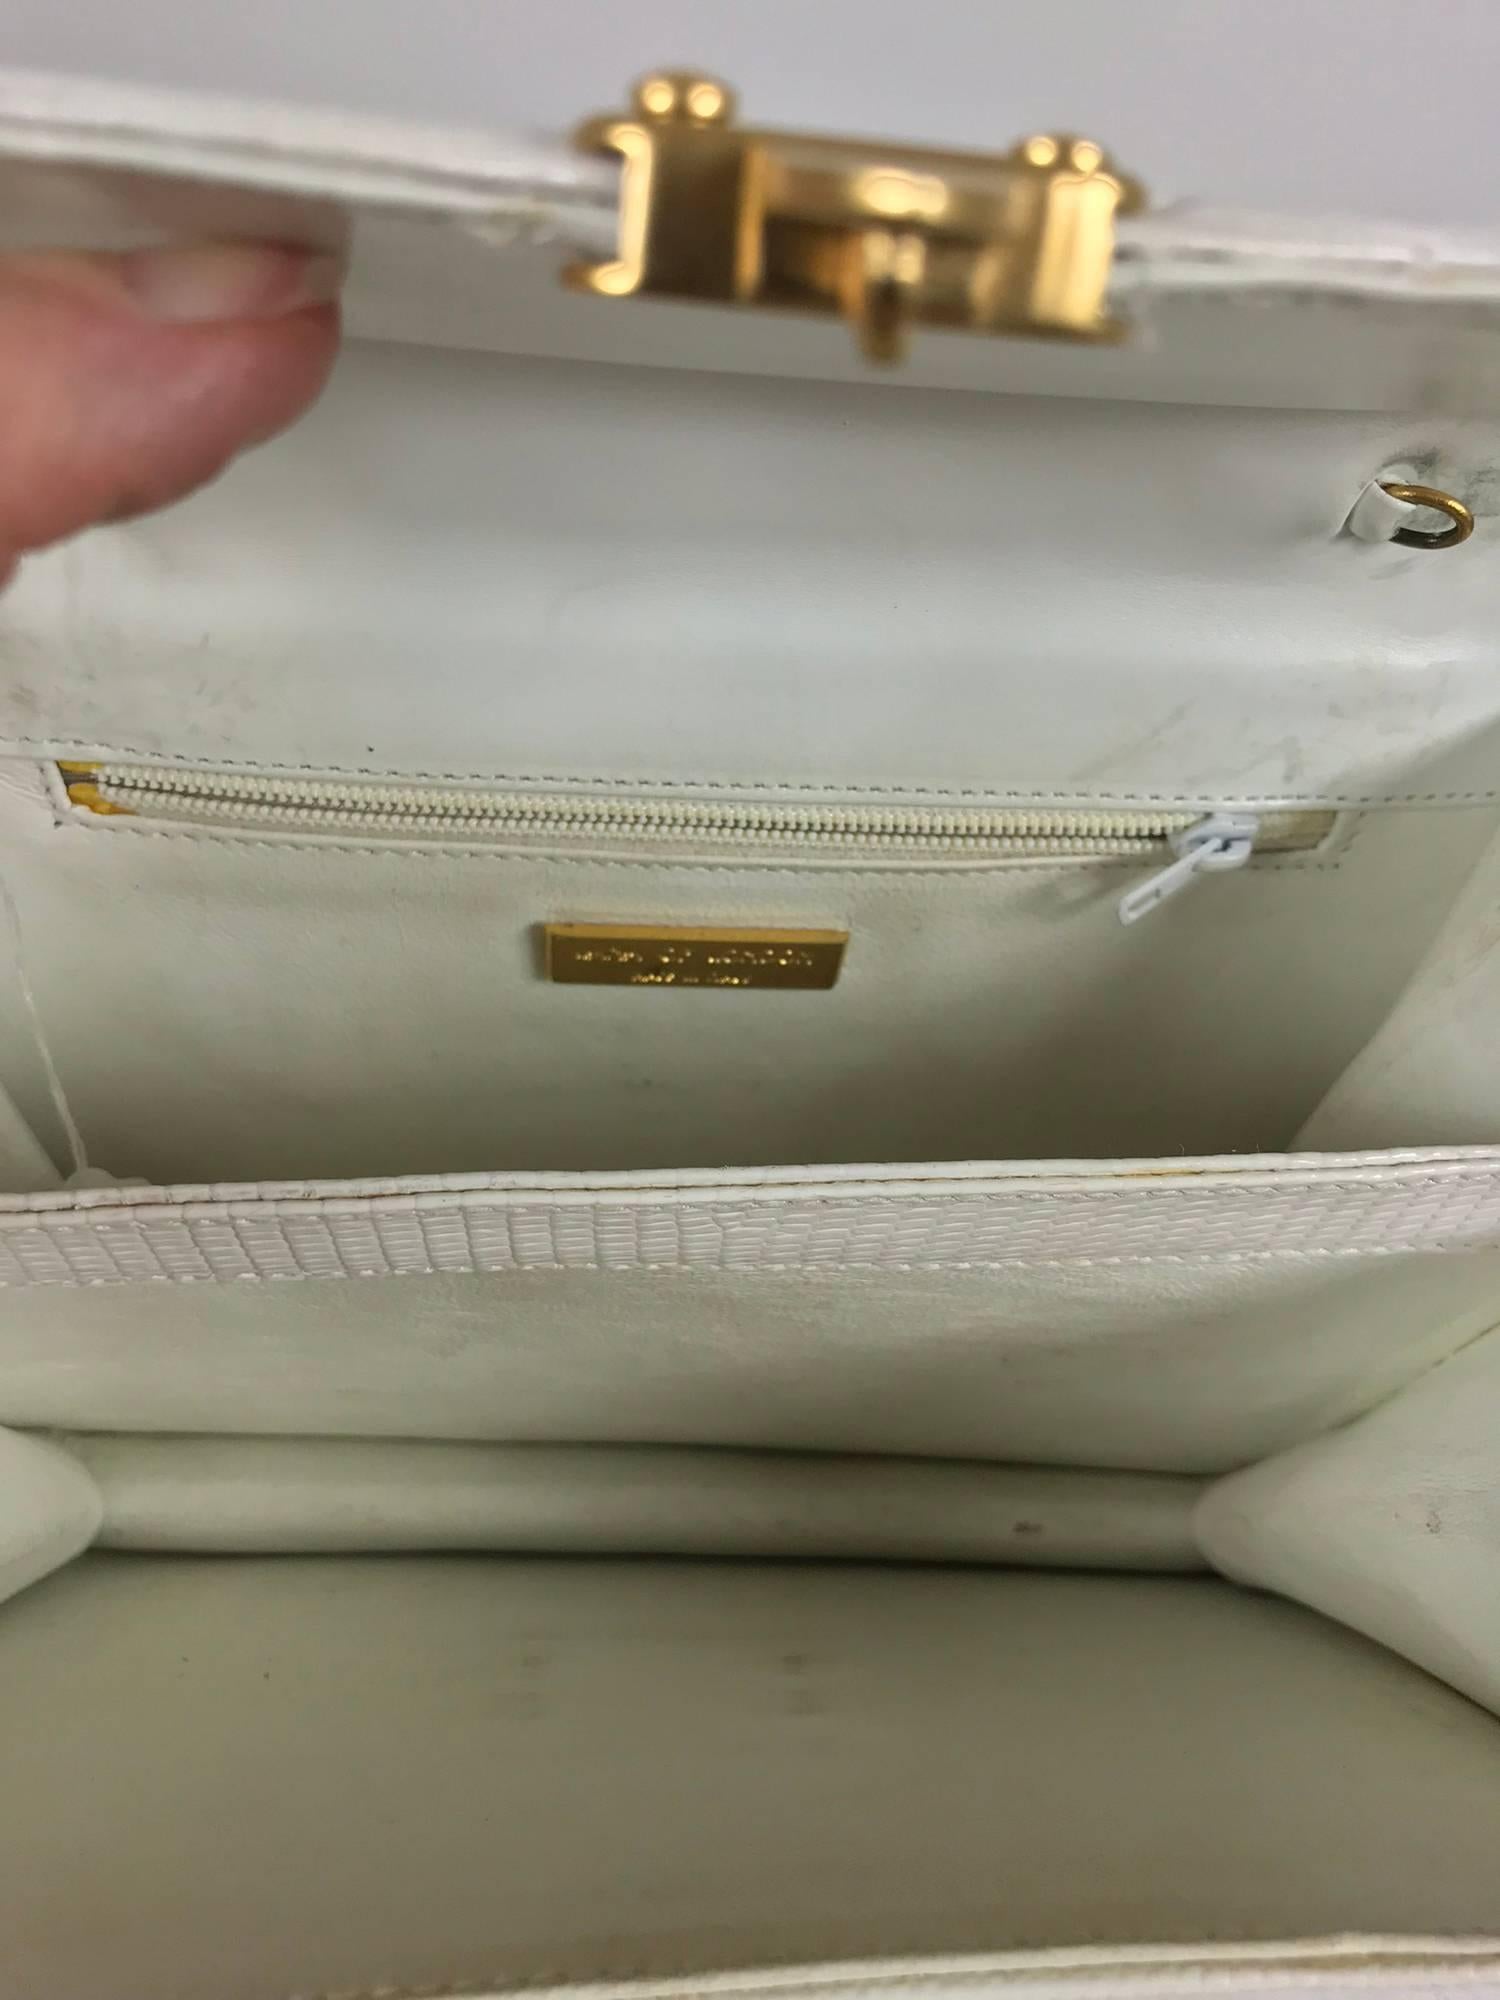 Lana of London white envelope lizard clutch gold hardware In Excellent Condition For Sale In West Palm Beach, FL